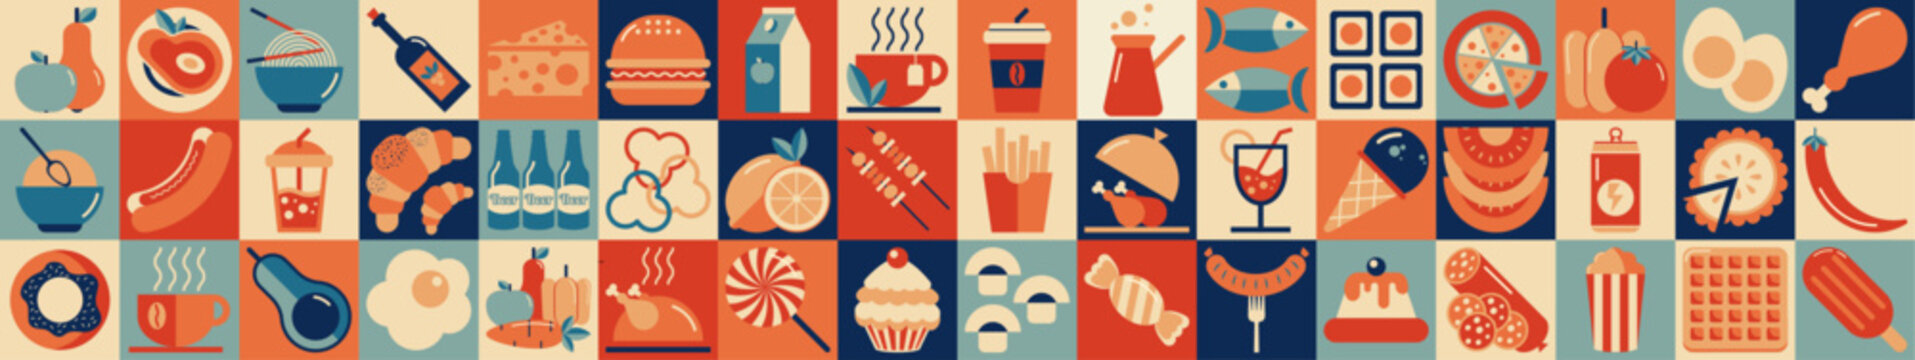 Set of 48 colorful icons related to food and drinks. Abstract food and drink geometric pattern. Mosaic style. Collection of food icons. Vector illustration